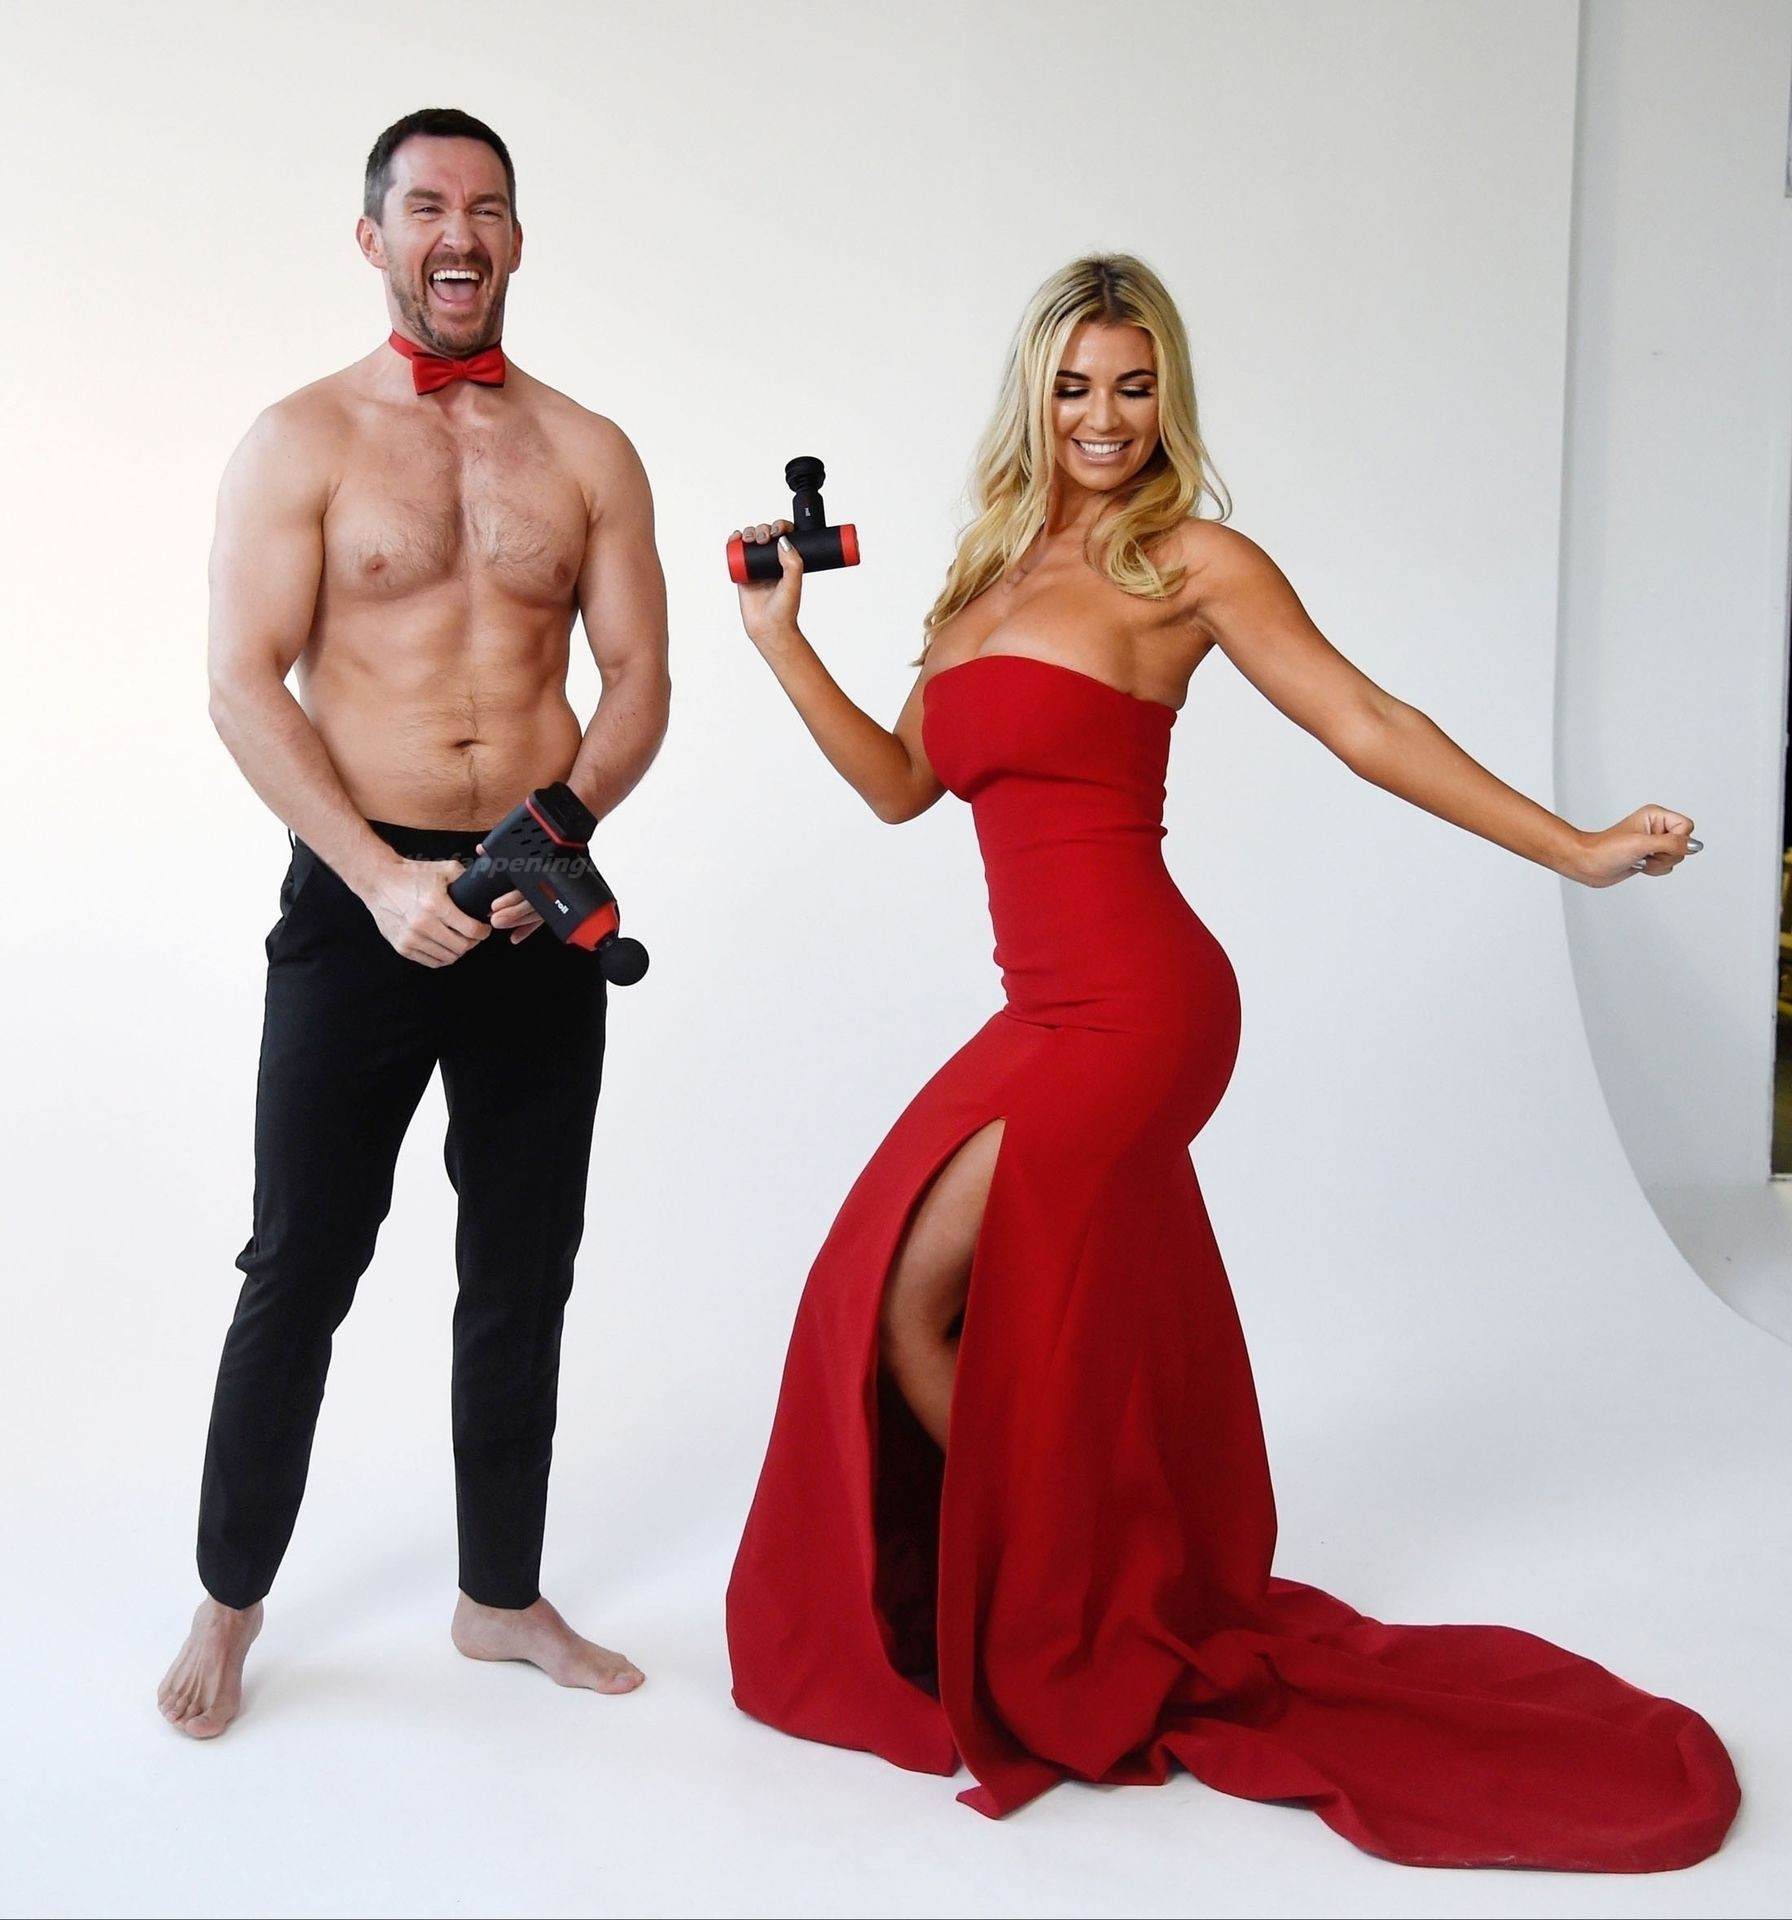 Christine McGuinness  Anthony Quinlan are Pictured Having Fun Together (36 Photos)